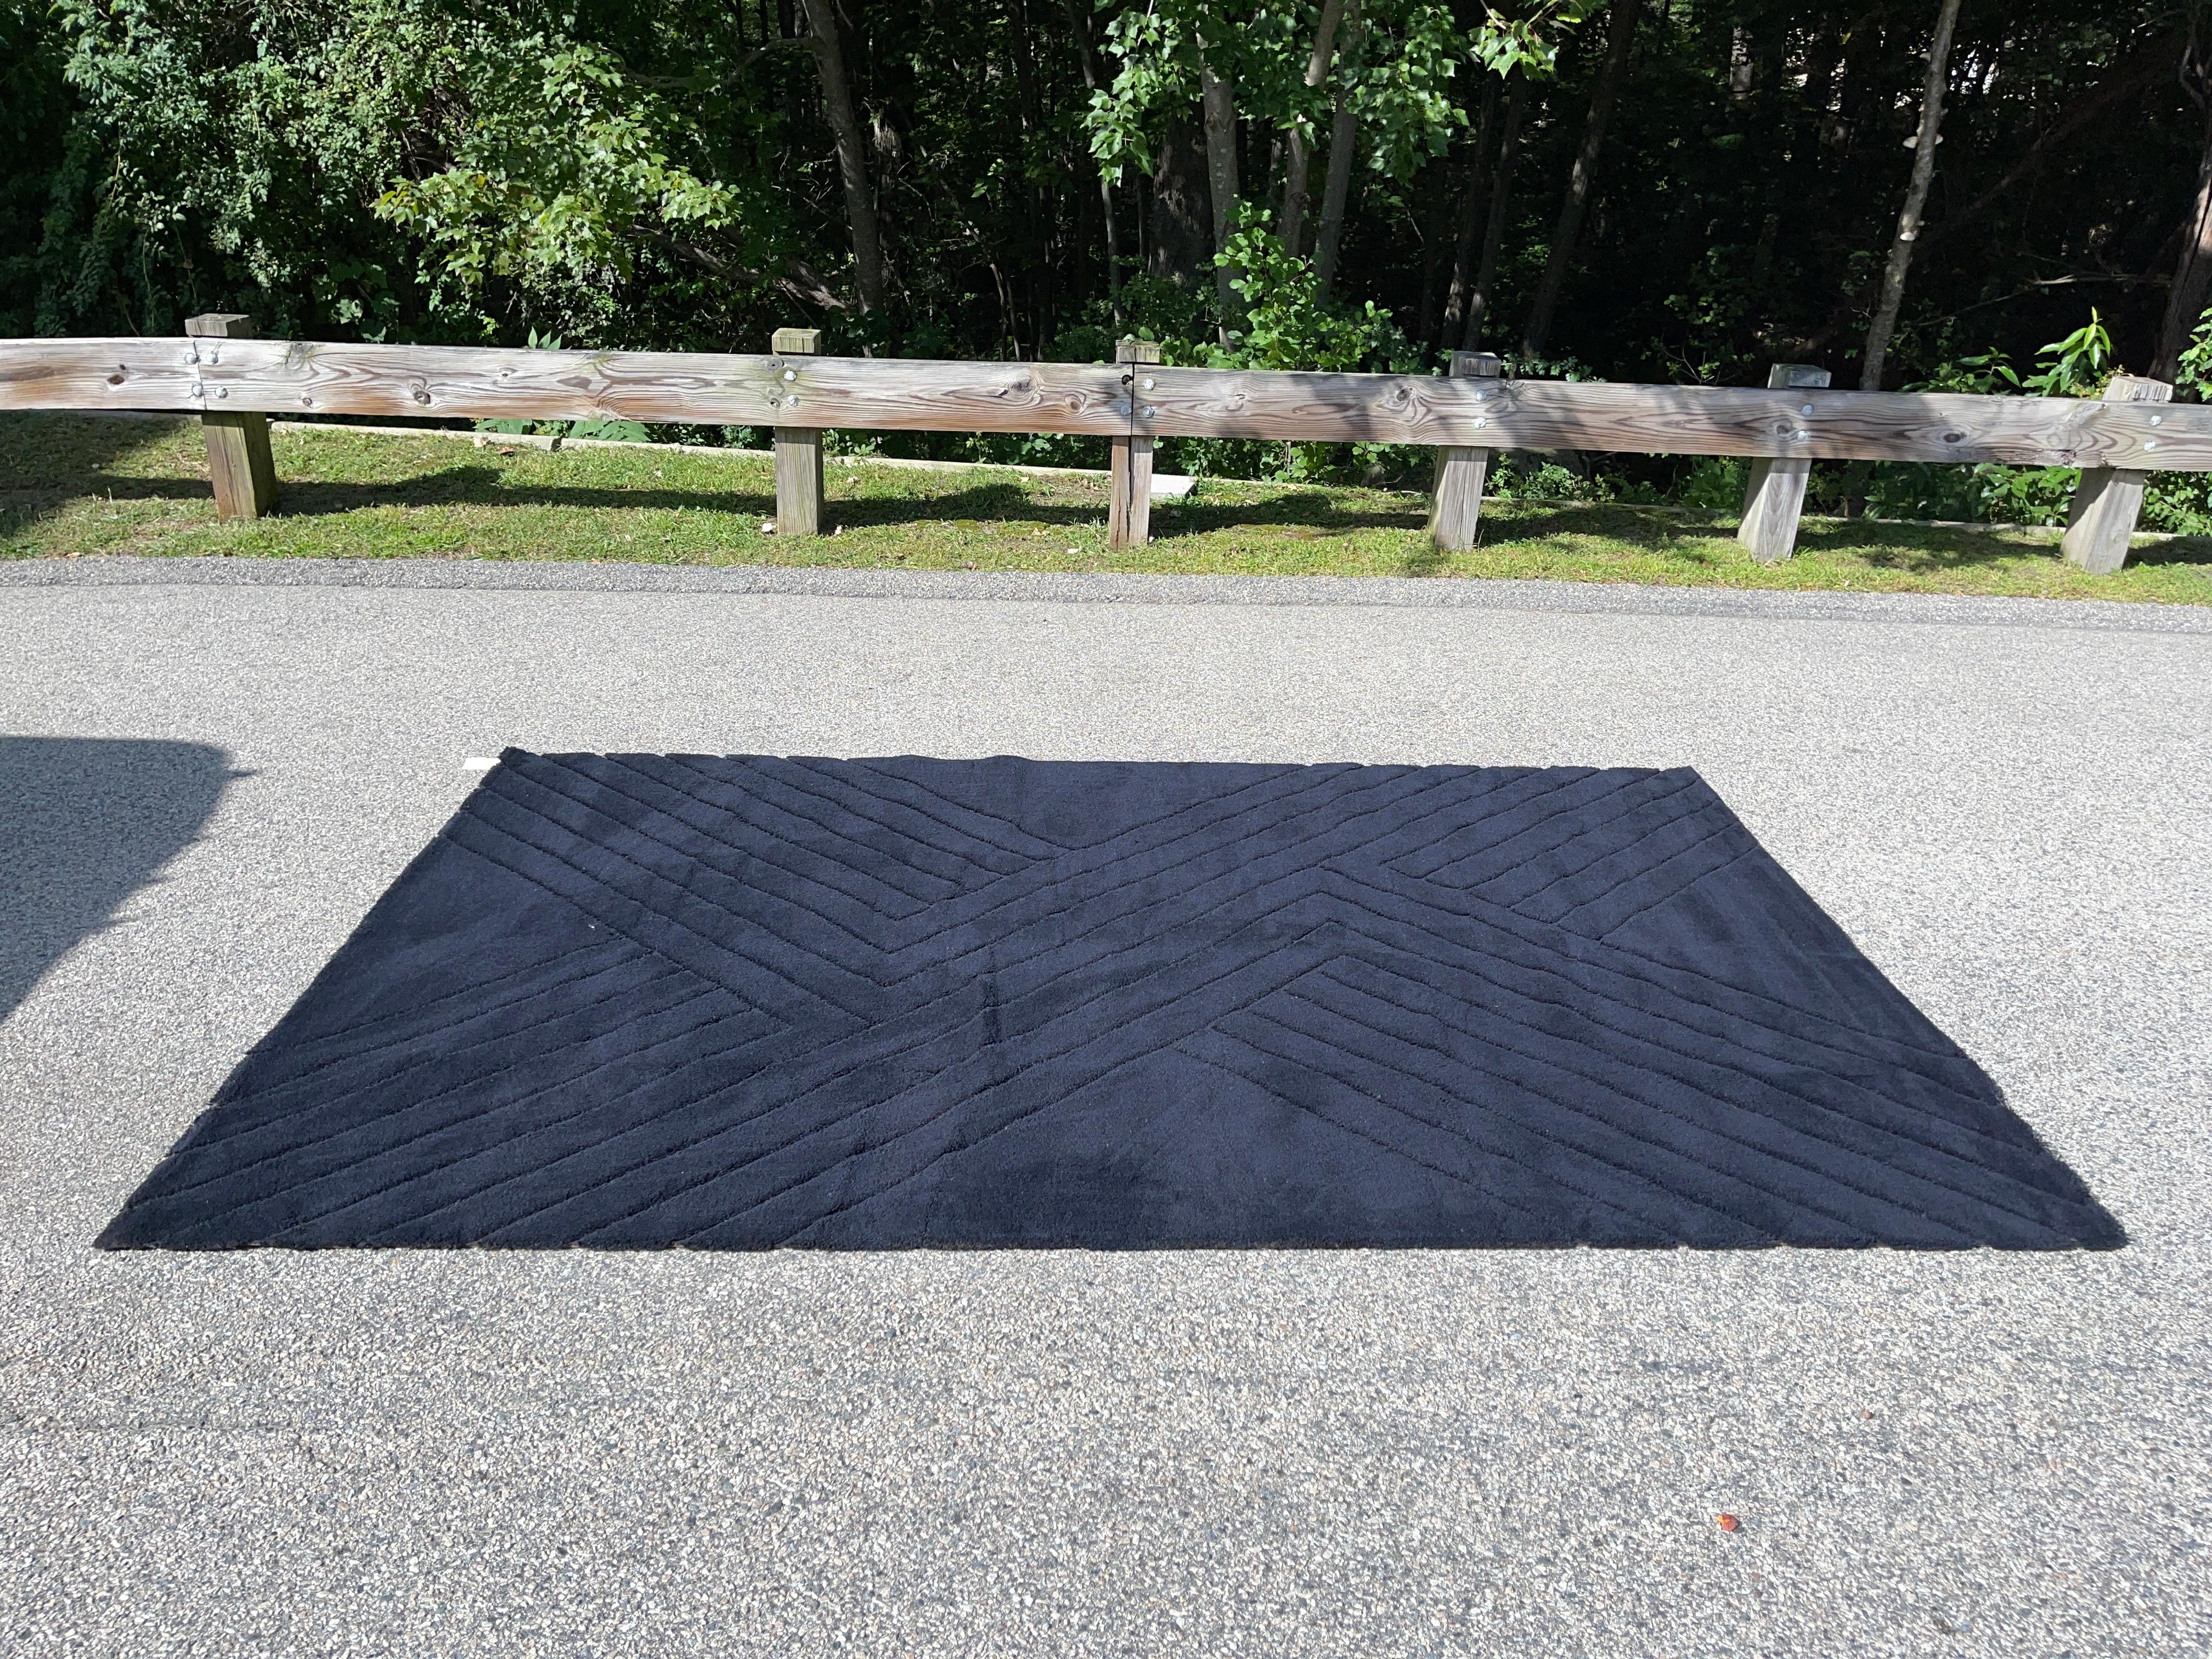 Vintage rectangular 100% black wool sculpted rya rug produced in the 1960's but never used.
Has been kept rolled and wrapped in storage for over 50 years. Your feet will be the very first to walk on it.
Produced in Denmark by Hojer Eksport